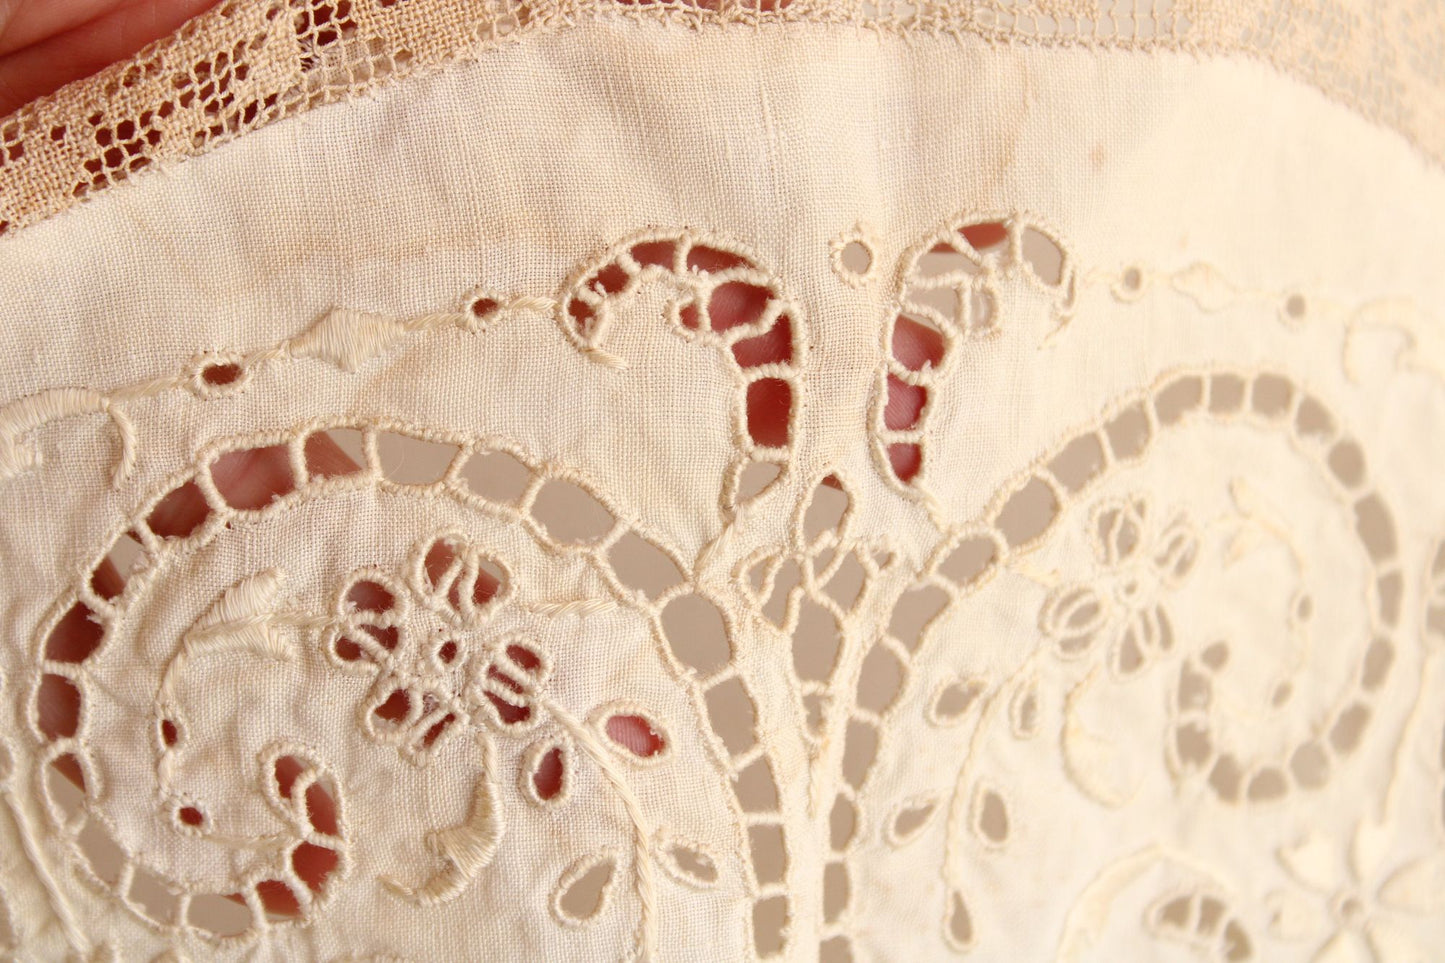 Vintage 1920s 1930s Doily of Embroidered Linen and Lace with a Cherub Pattern